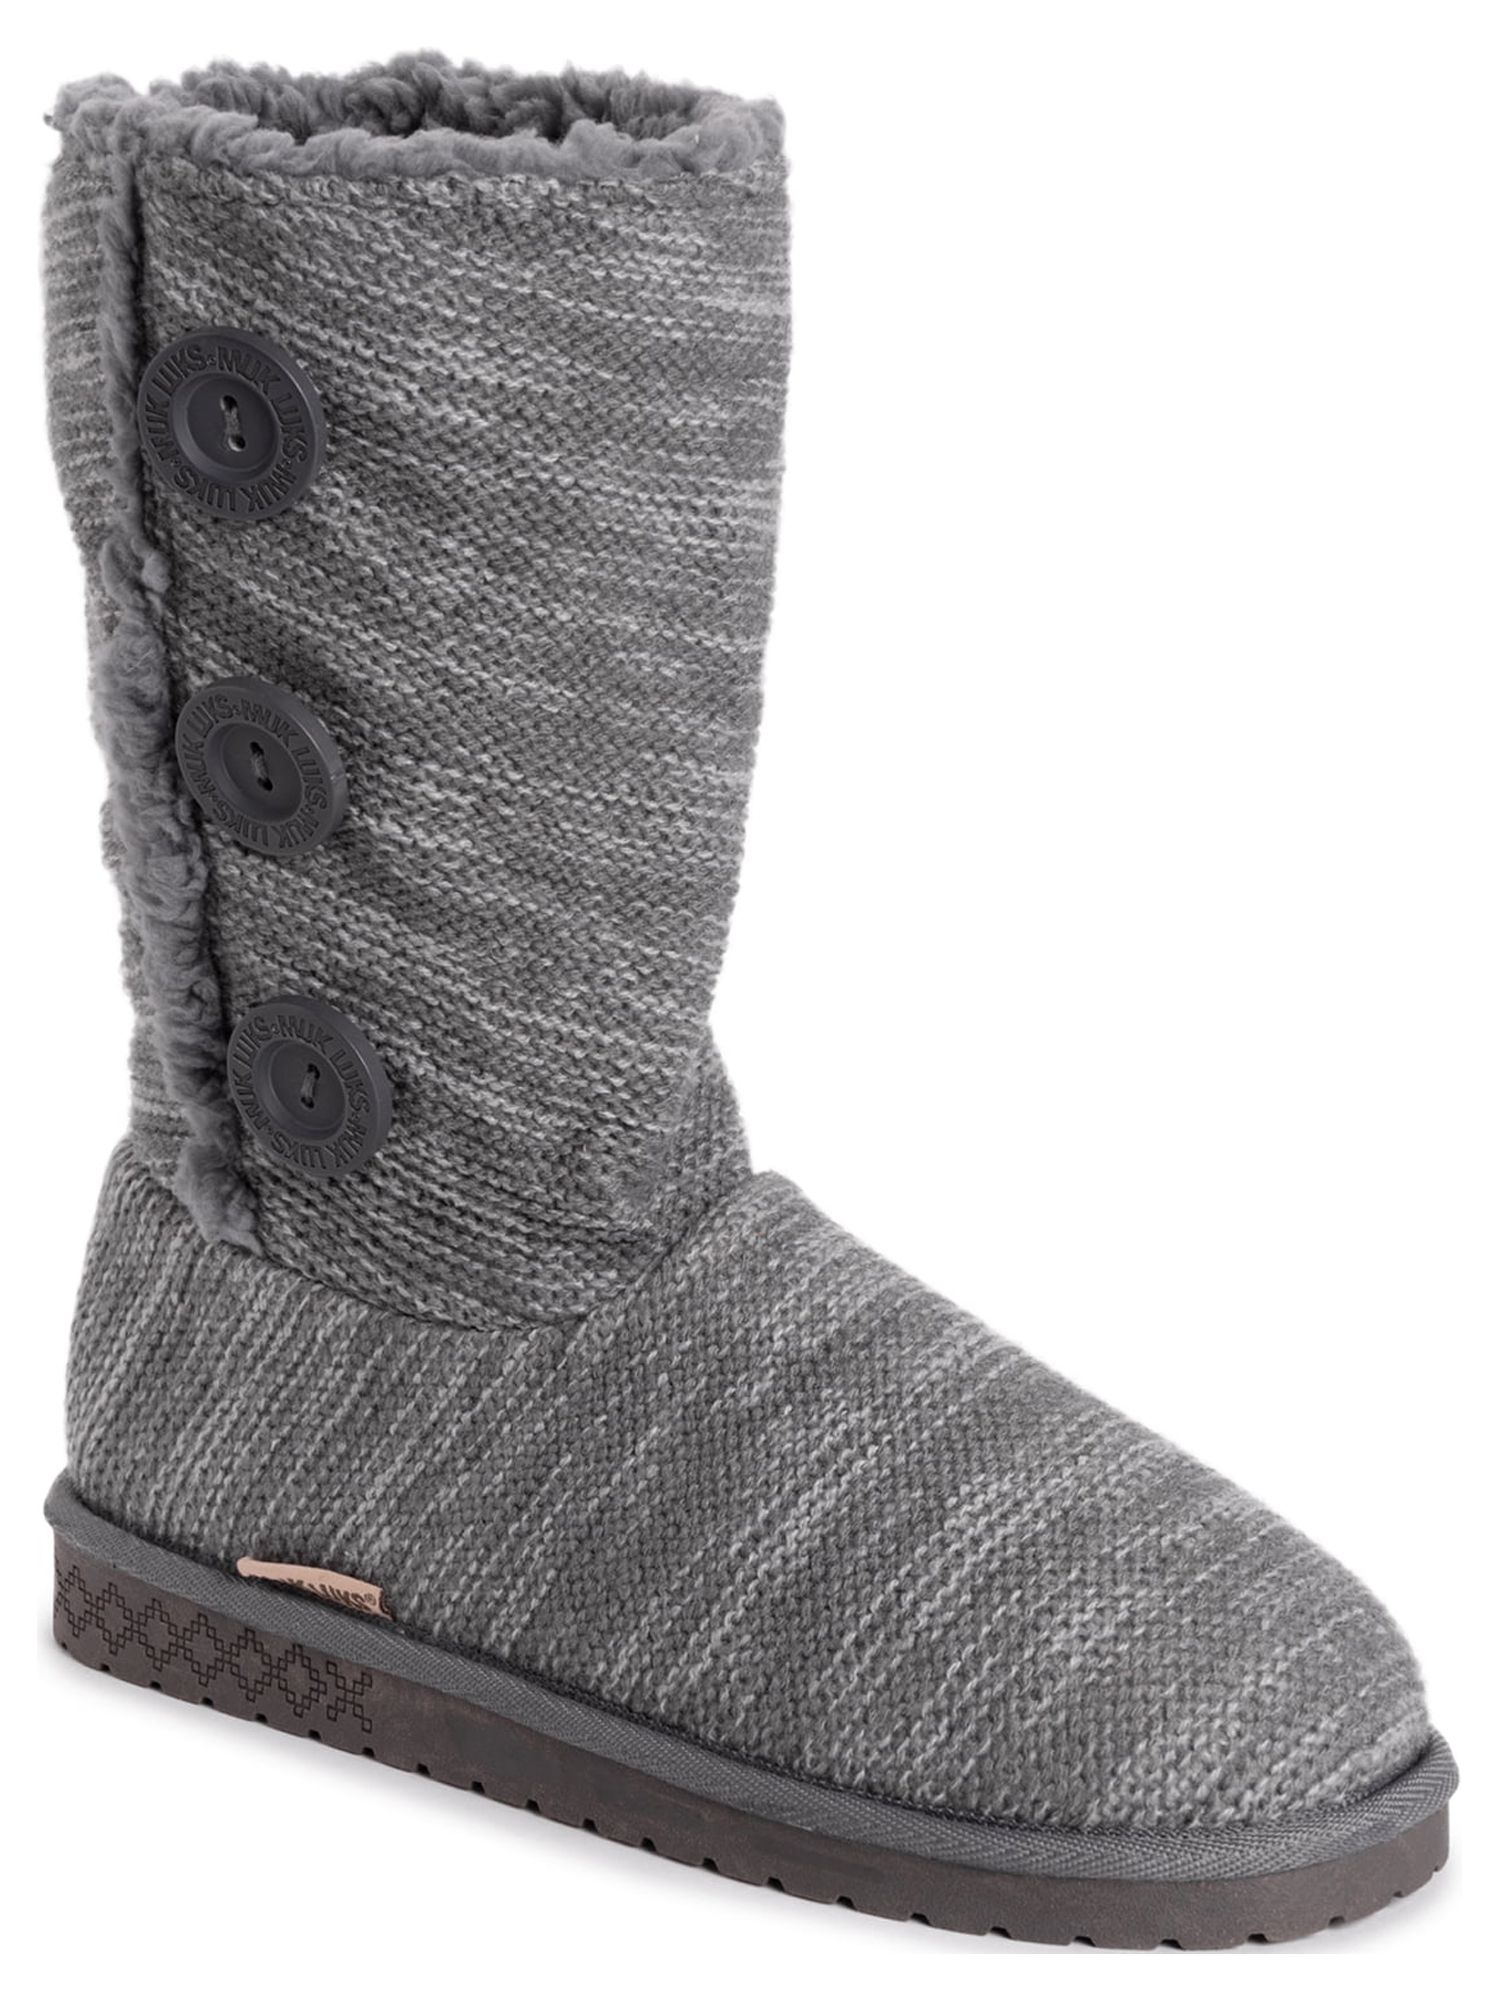 Muk Luks Women's Angel Faux Fur Lined Side Button Knit Boots - image 1 of 10